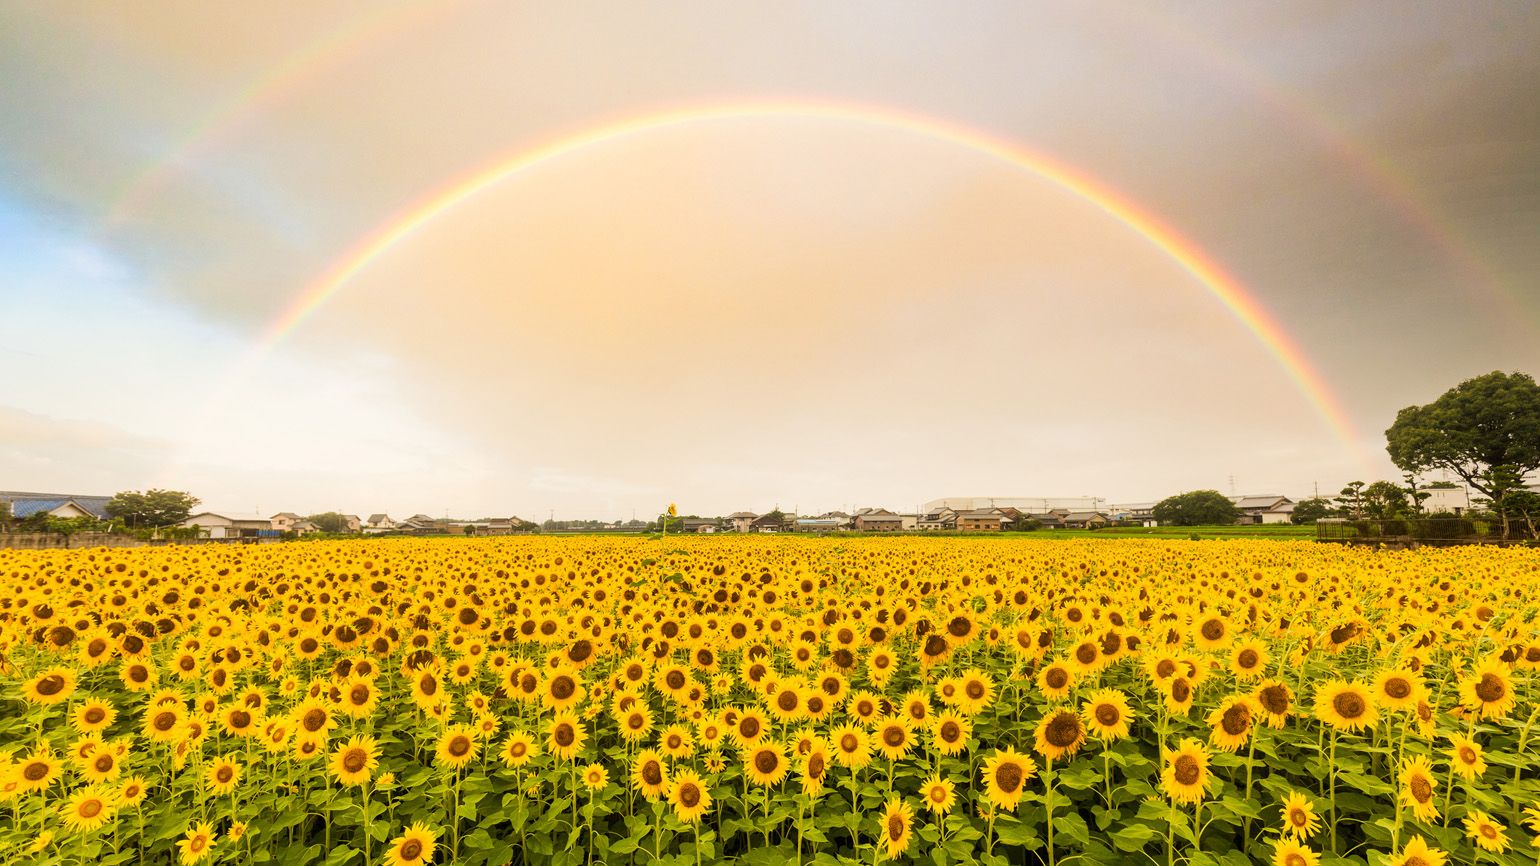 Rainbow over a sunflower field; Getty Images